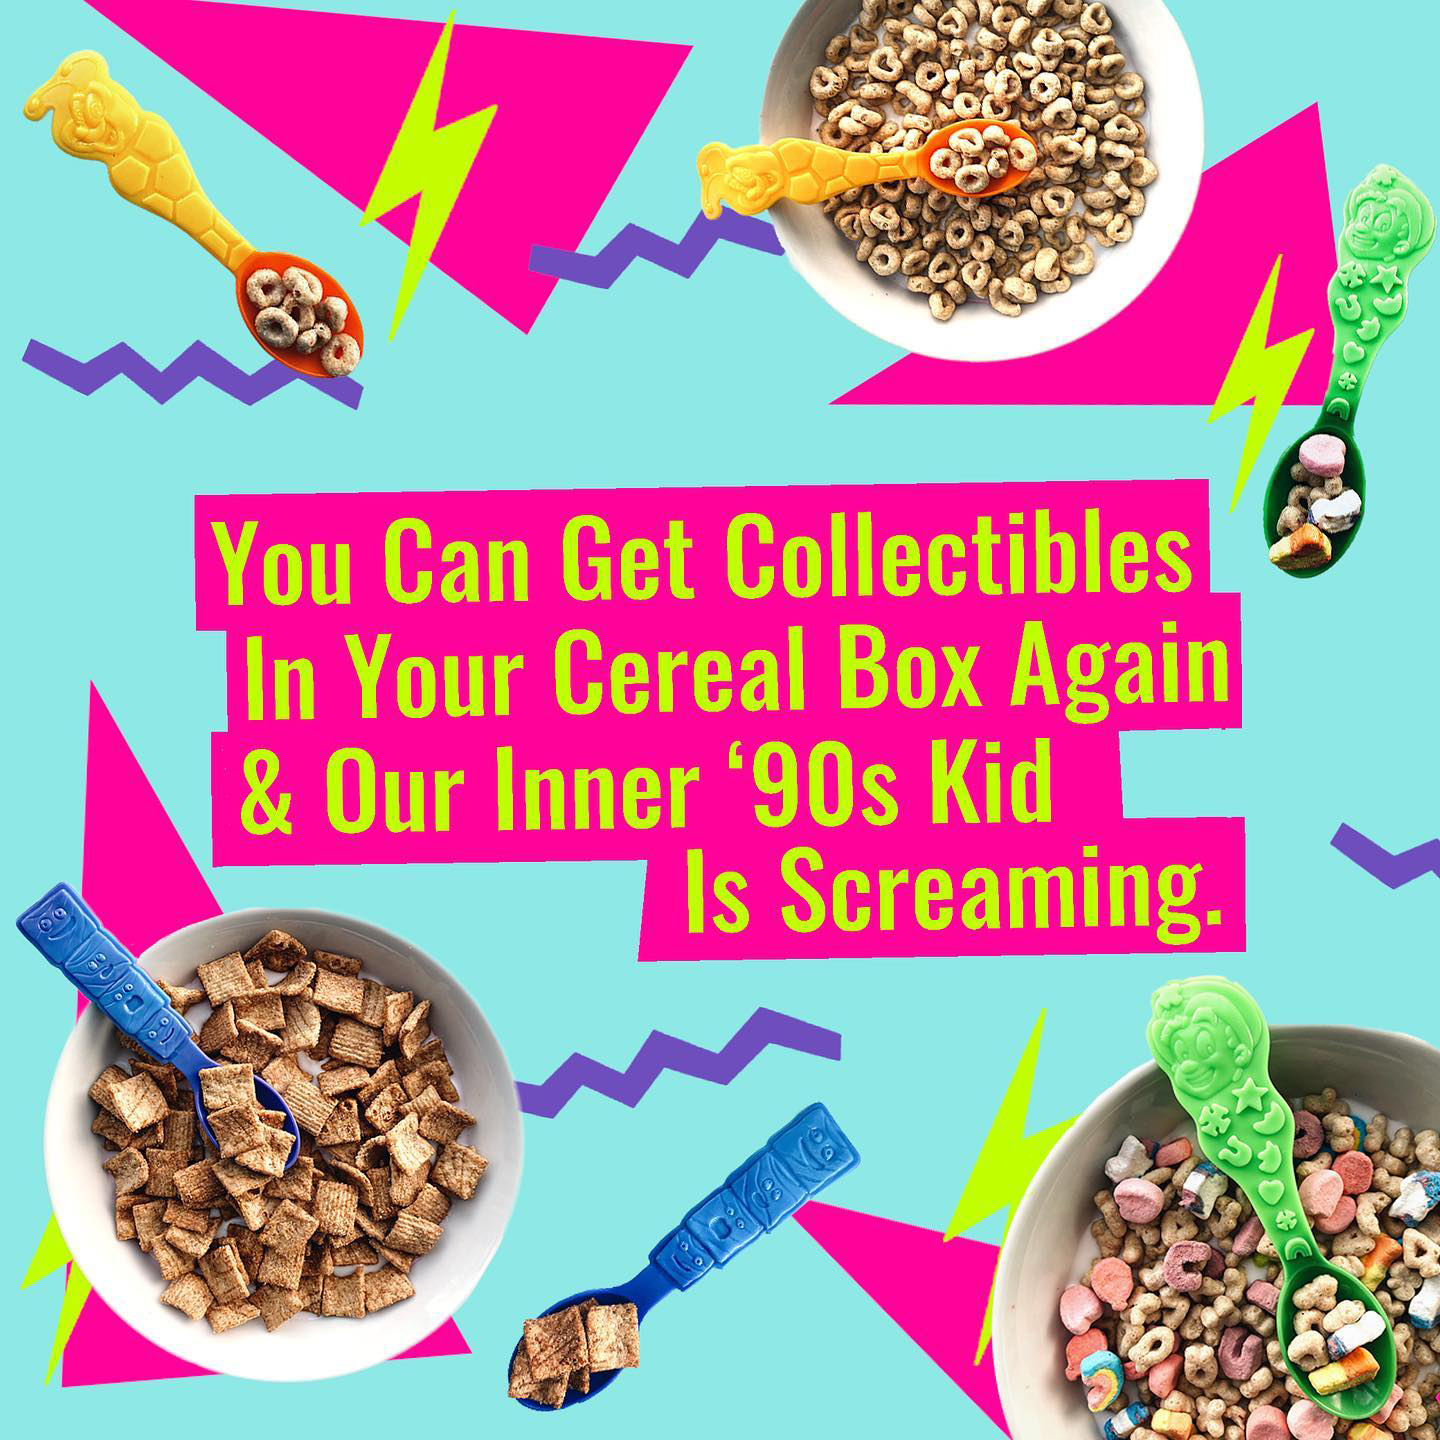 You can get collectibles in your cereal box again & out inner '90s kid is screaming